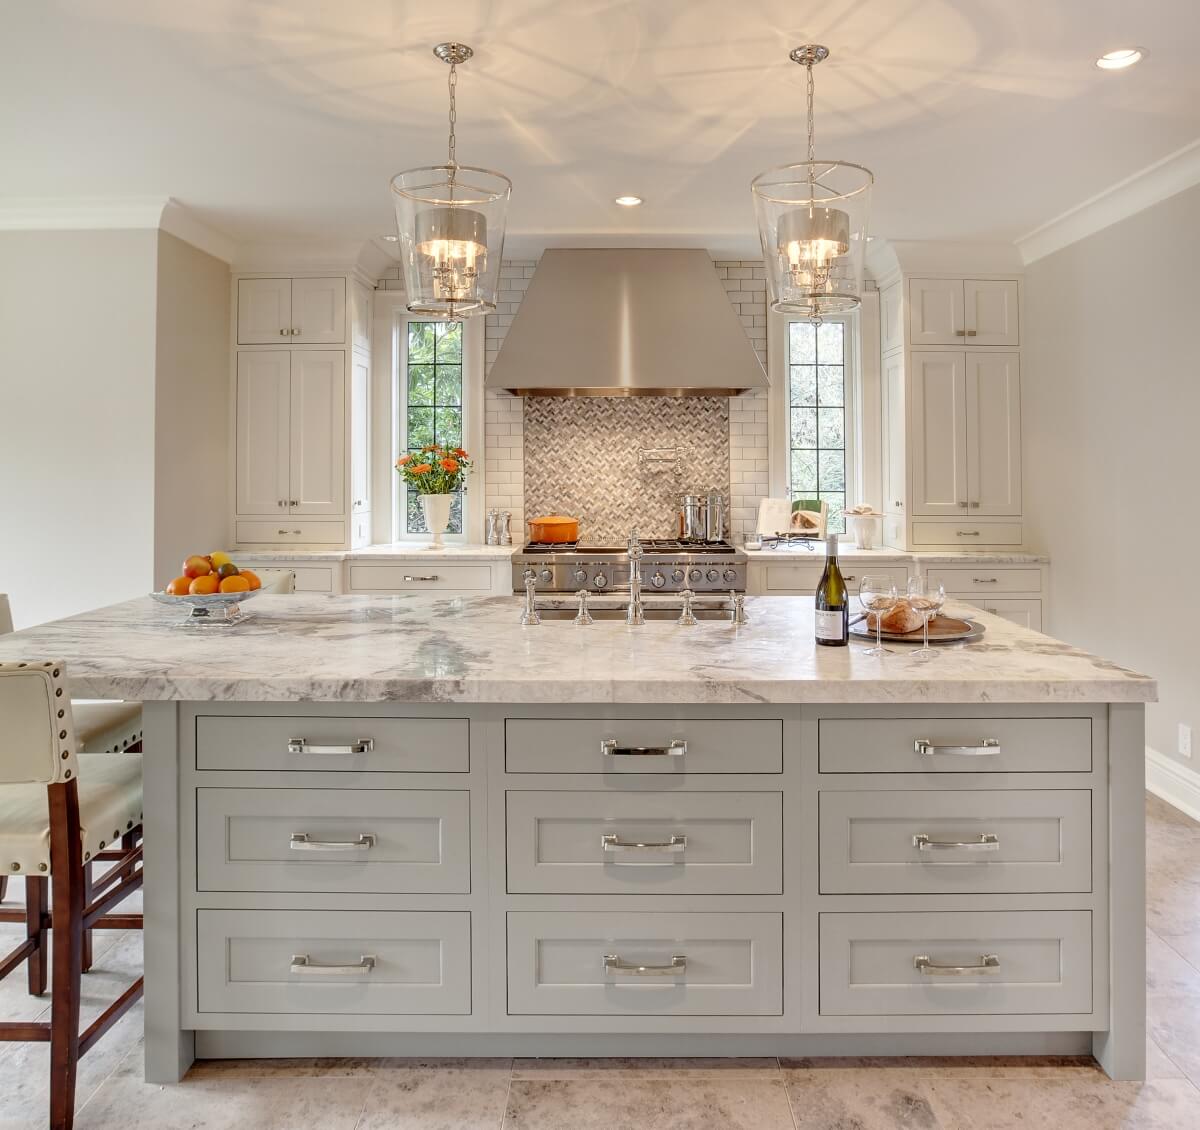 Dura Supreme Cabinetry kitchen design by Beverly Bradshaw Interiors, photography by Tom Marks Photo, cabinetry by Collaborative Interiors. Showcasing Dura Supreme Cabinetry in the Classic White and Zinc painted finishes.